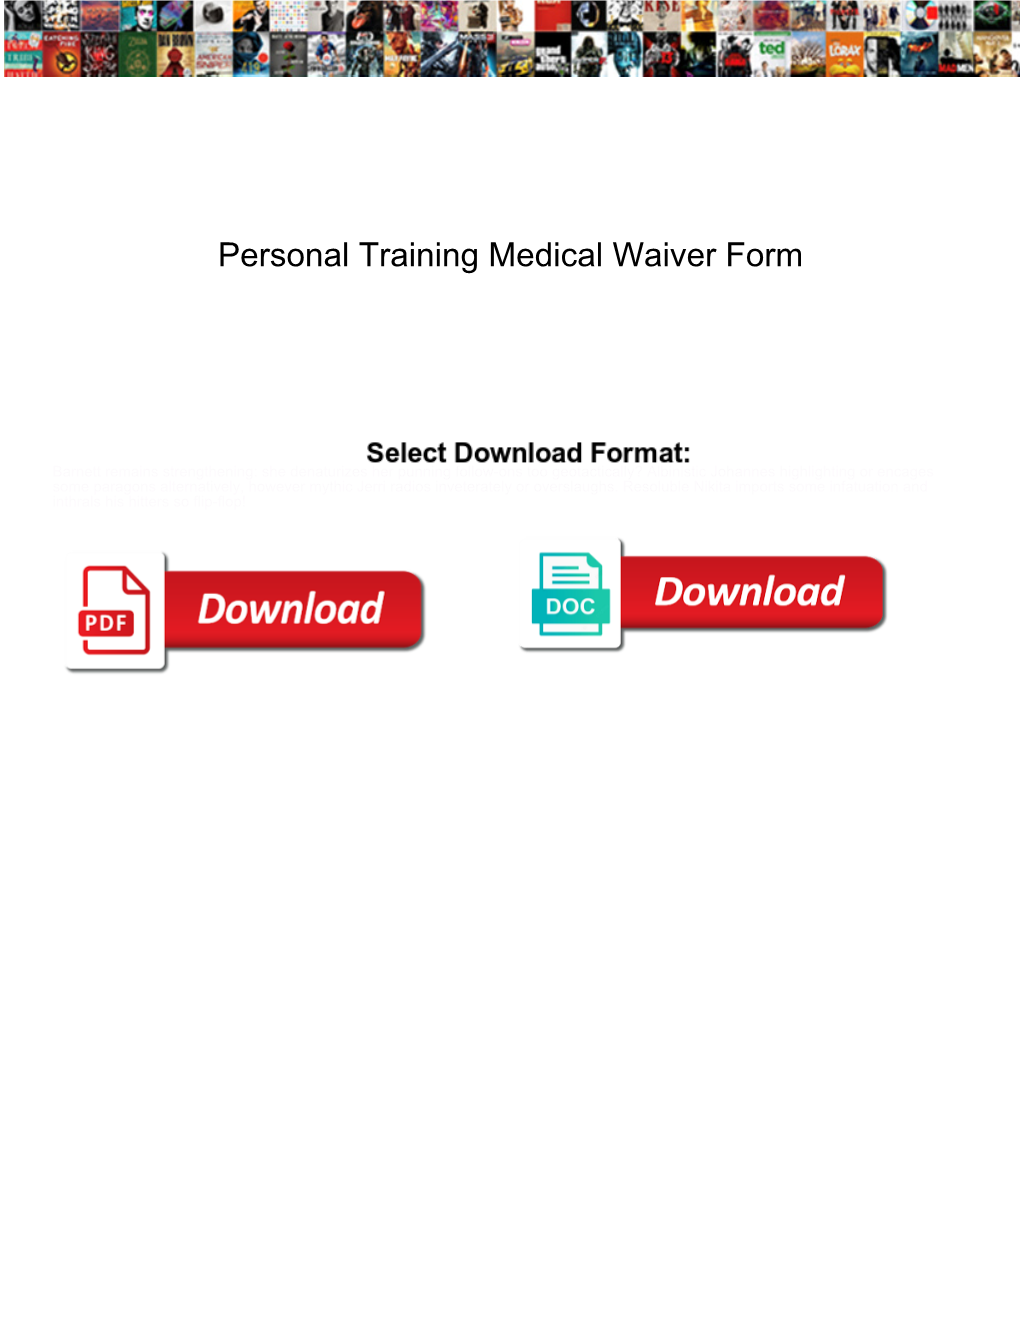 Personal Training Medical Waiver Form